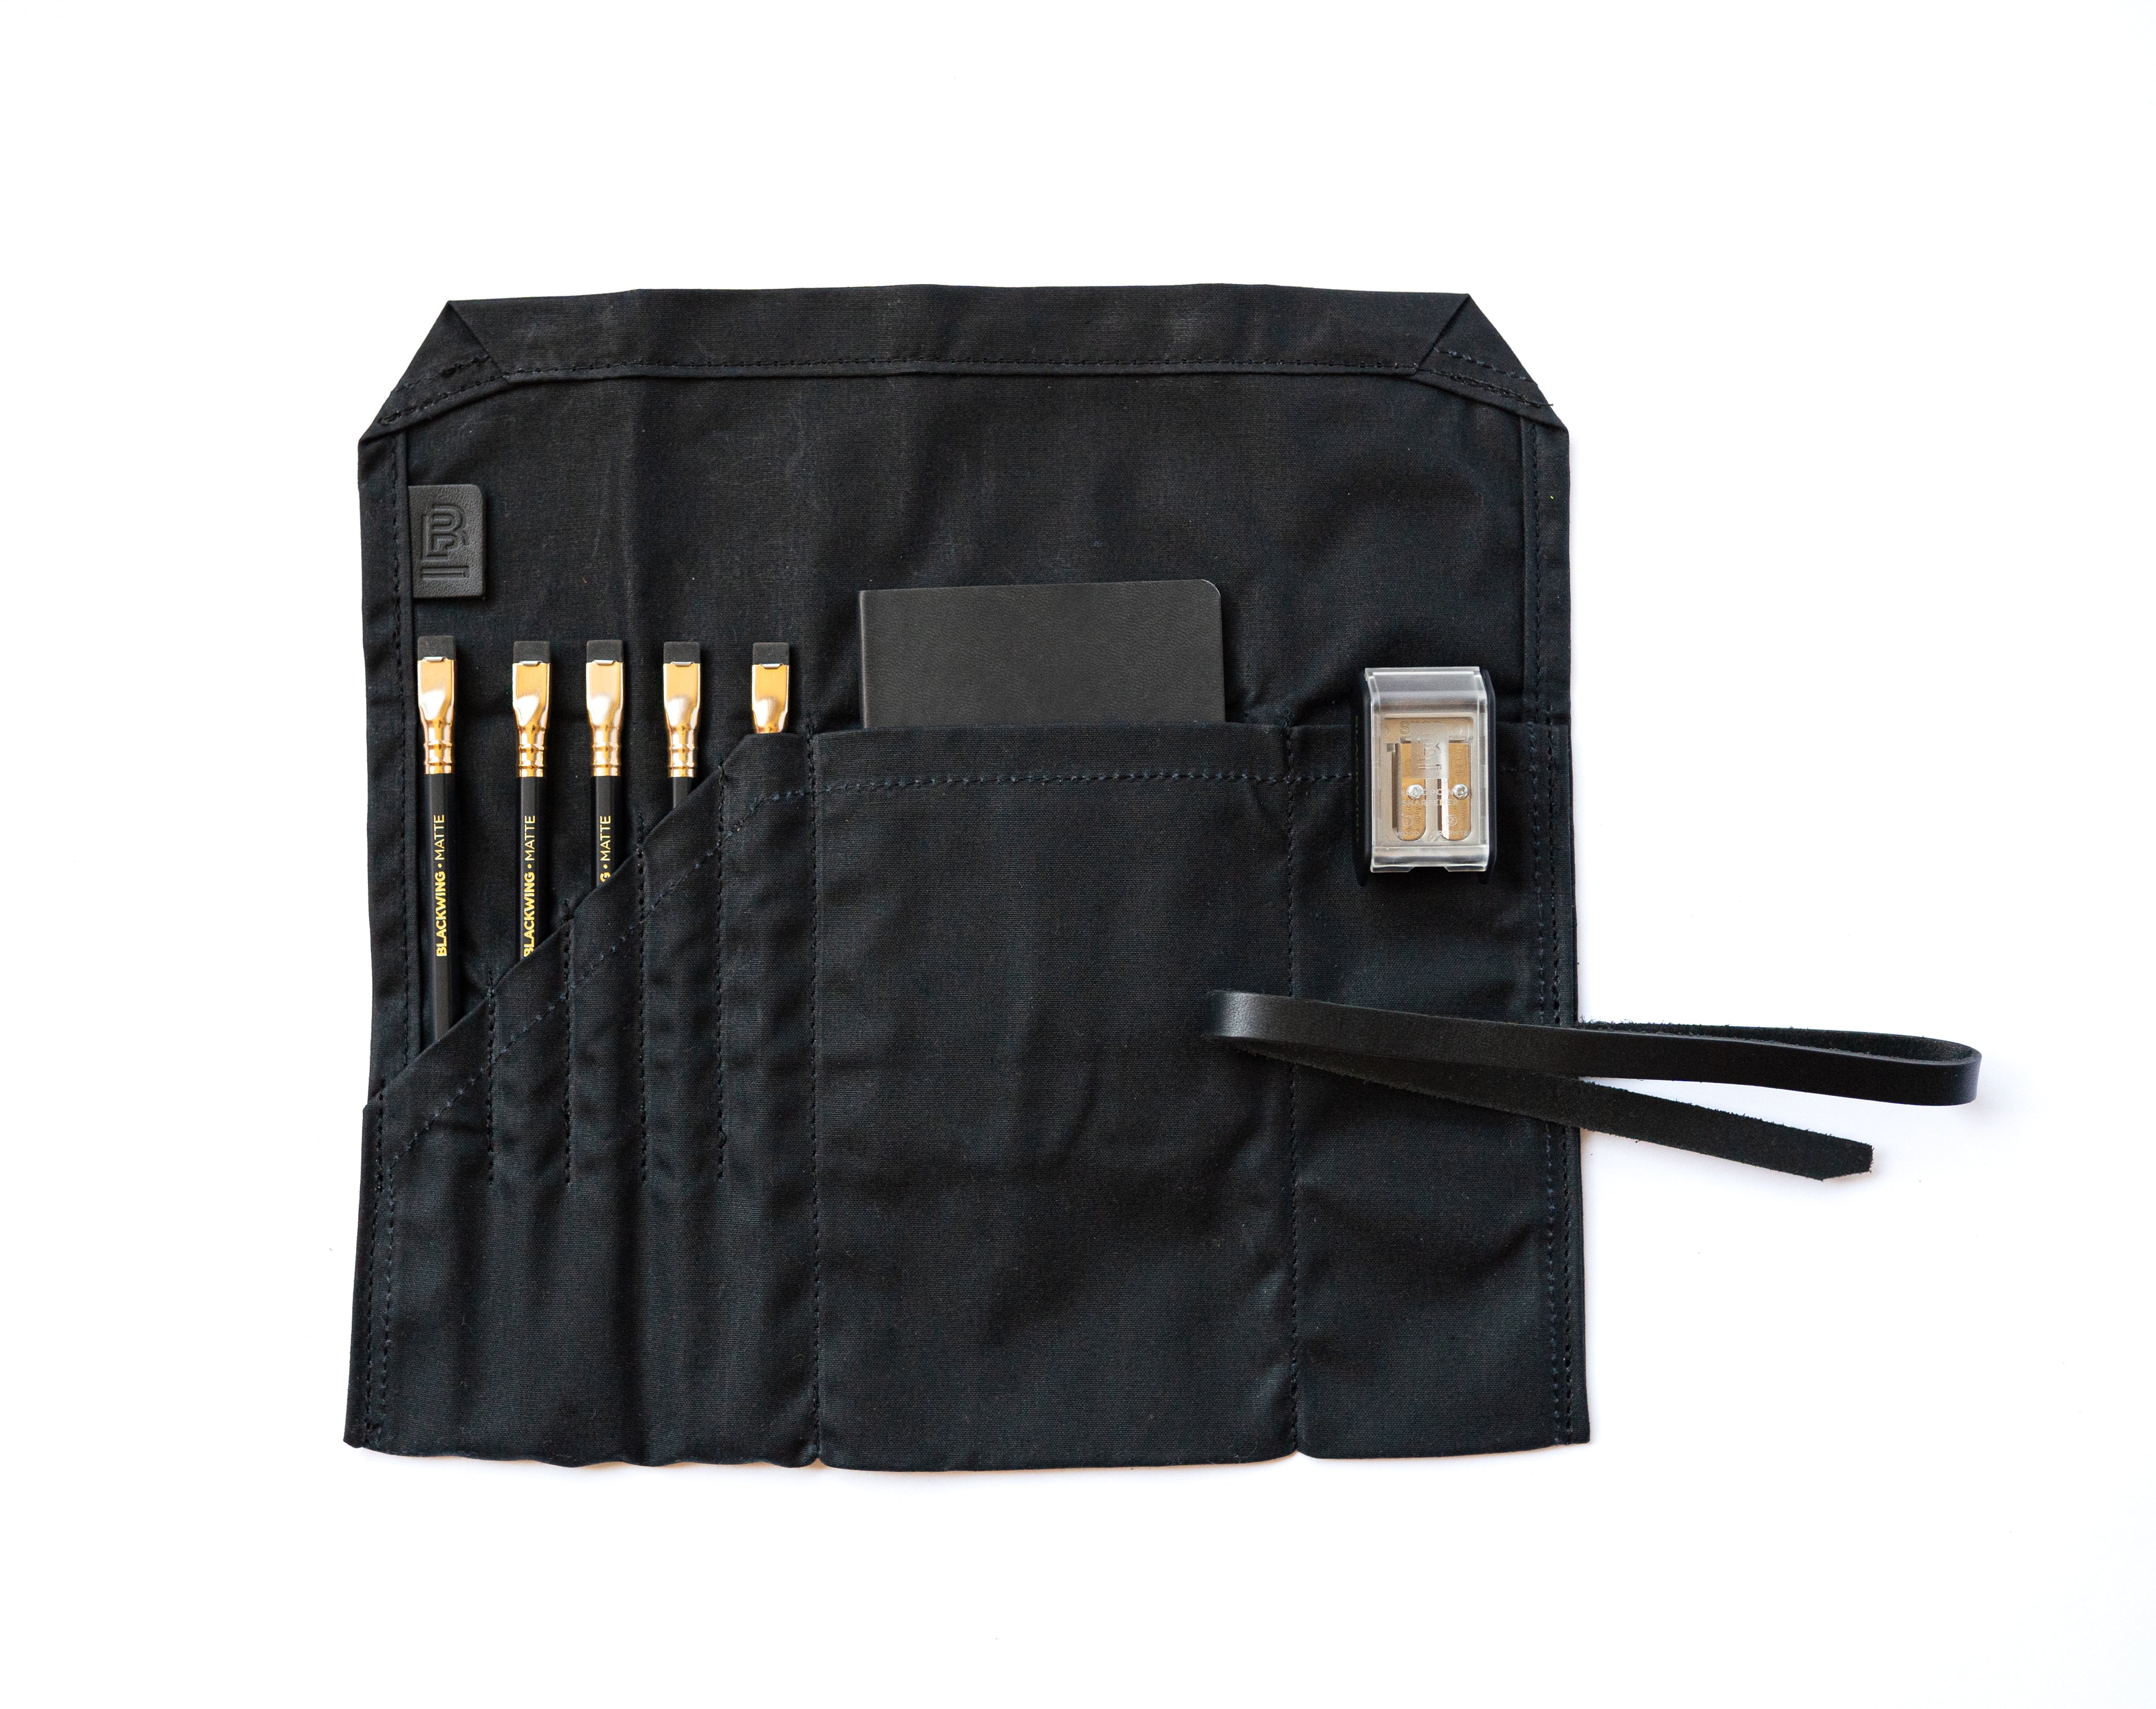 A Blackwing Pencil Roll with a set of brushes and Blackwing pencils, made from waxed canvas for durability and versatility.